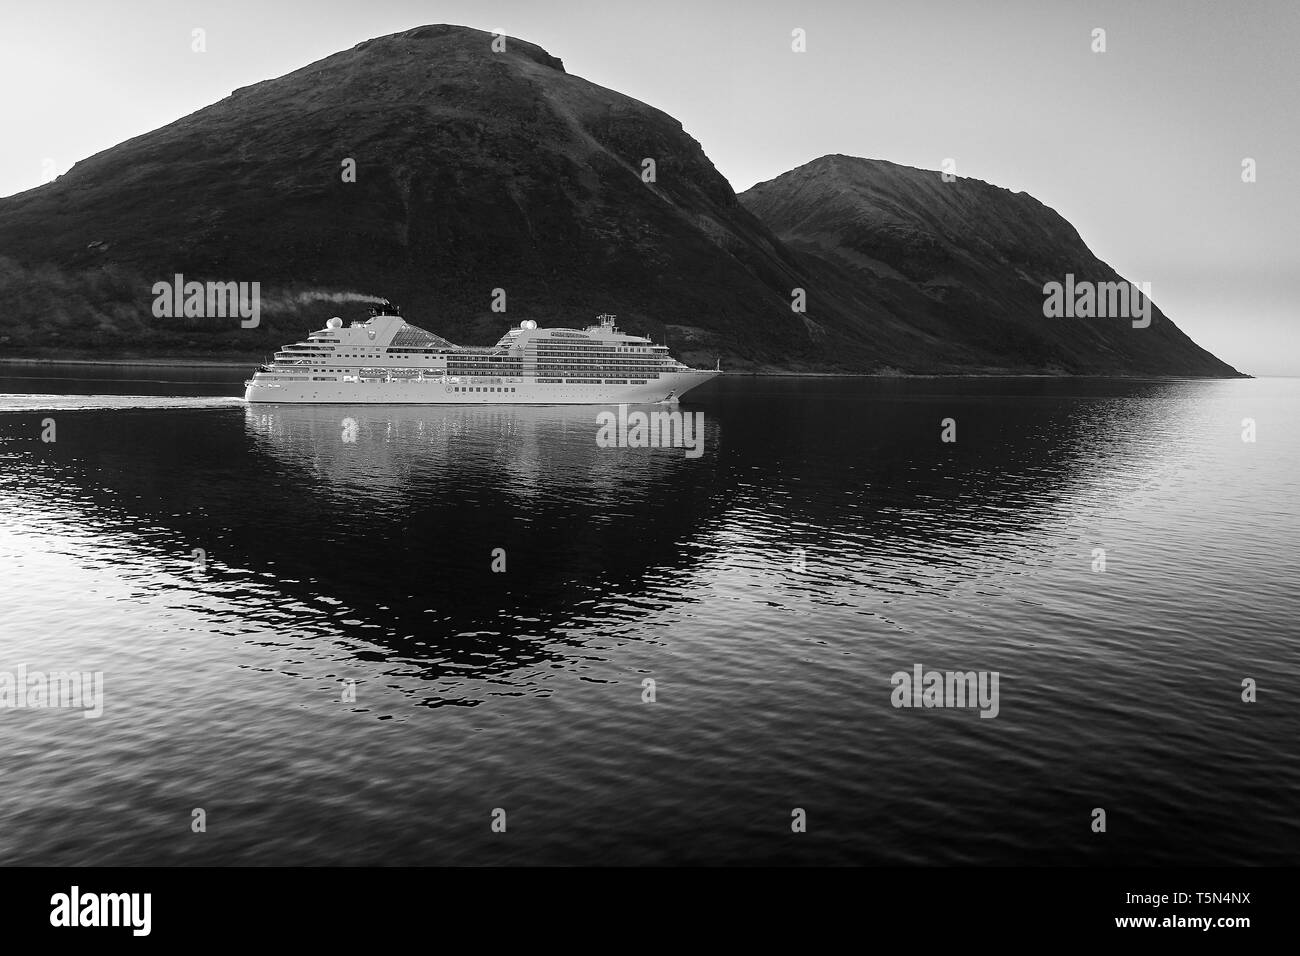 Black And White Photo Of The Cruise Ship, Seabourn Ovation, Sailing Through The Lauksundet, Close To Skjervøy, North Of The Arctic Circle. Norway. Stock Photo